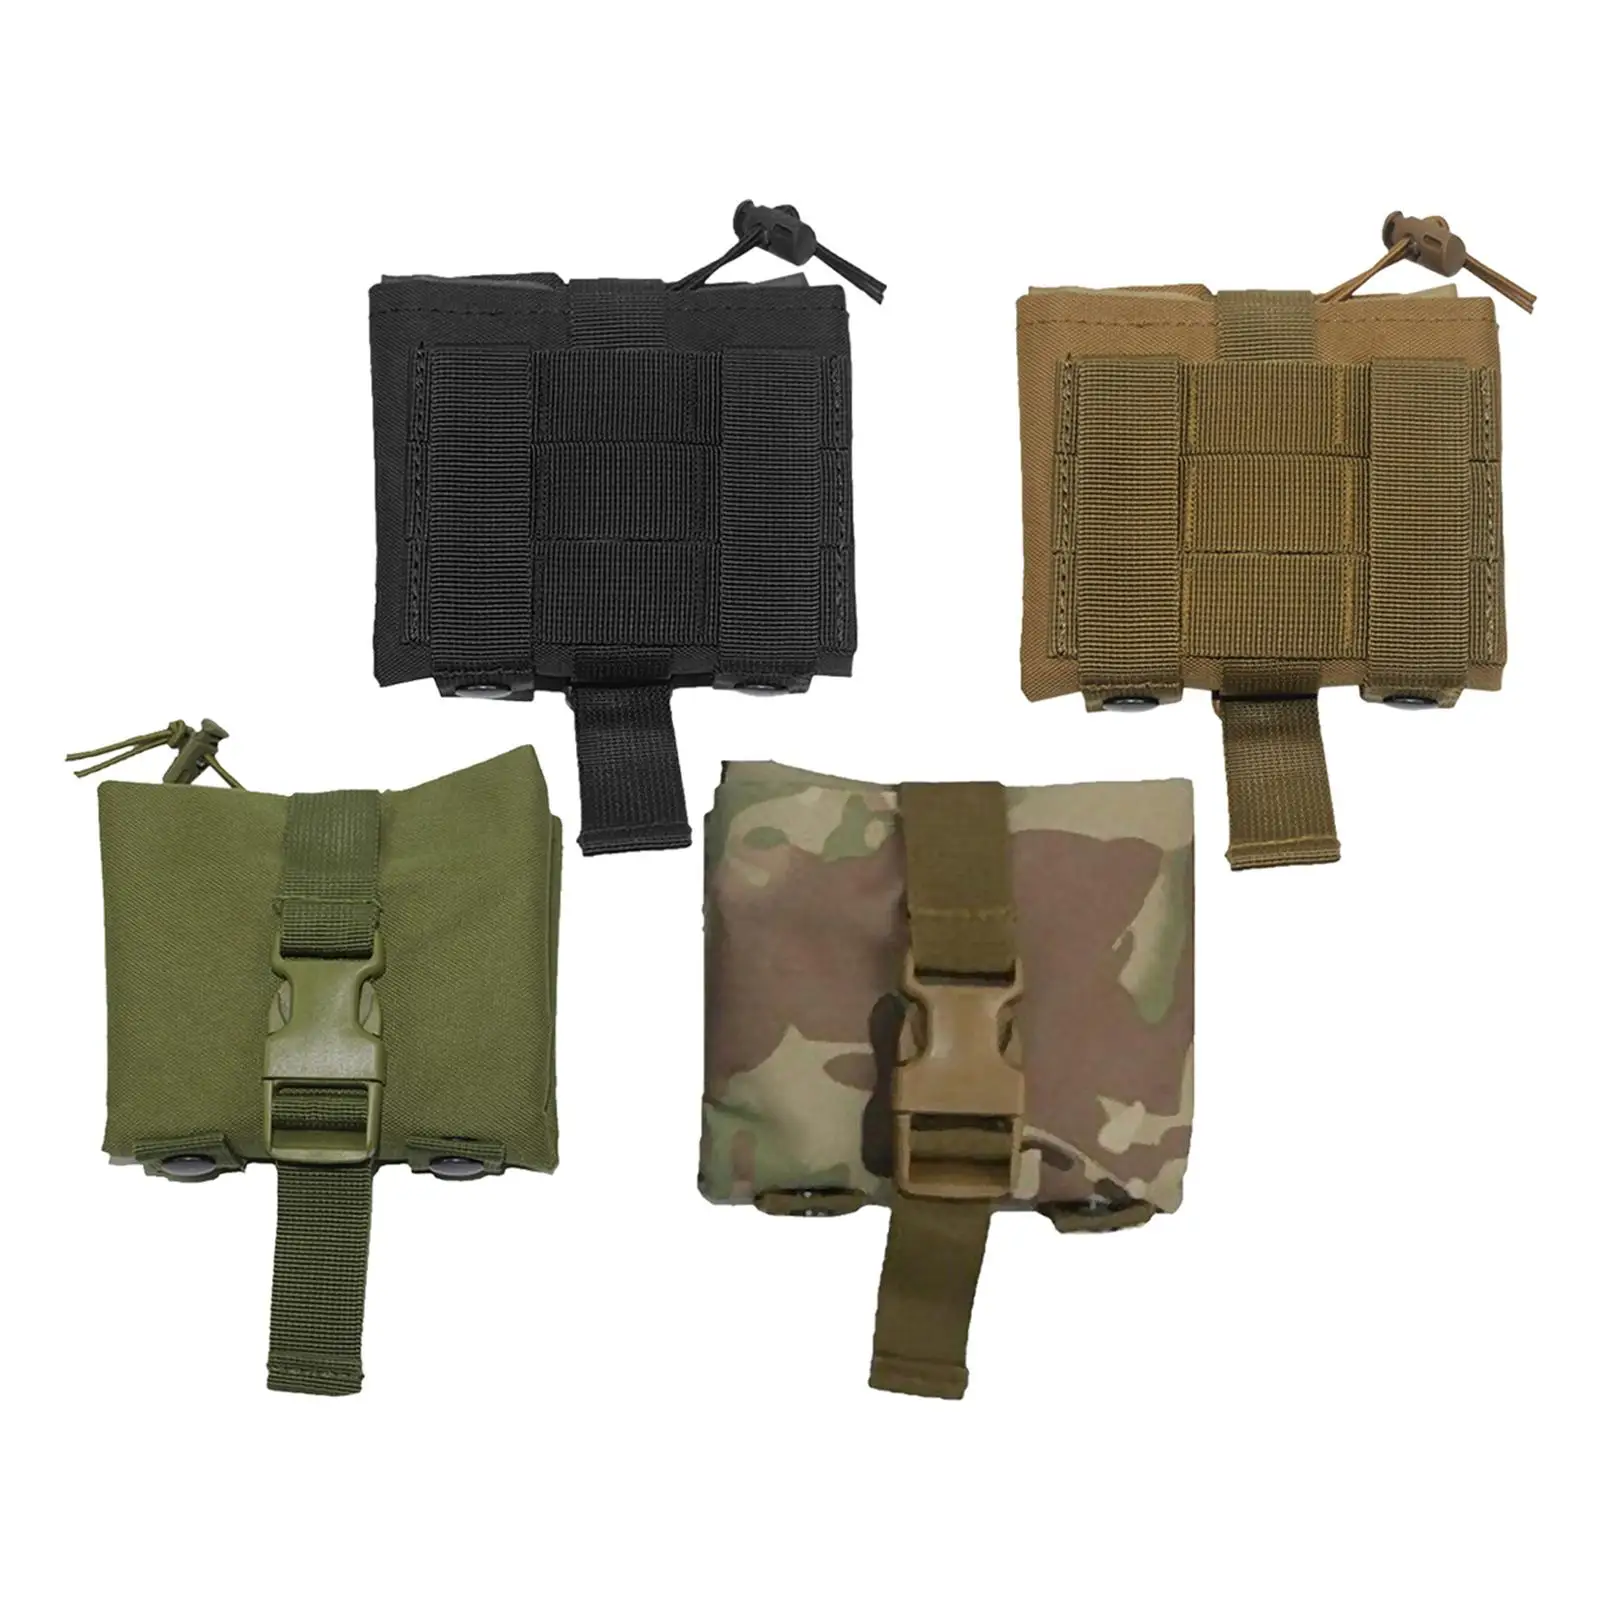 Multifunction Magazine Drop Pouch Collapsible Durable Attachments Drawstring Bag Adjustable Molle Dump Pouch for Camping Hunting